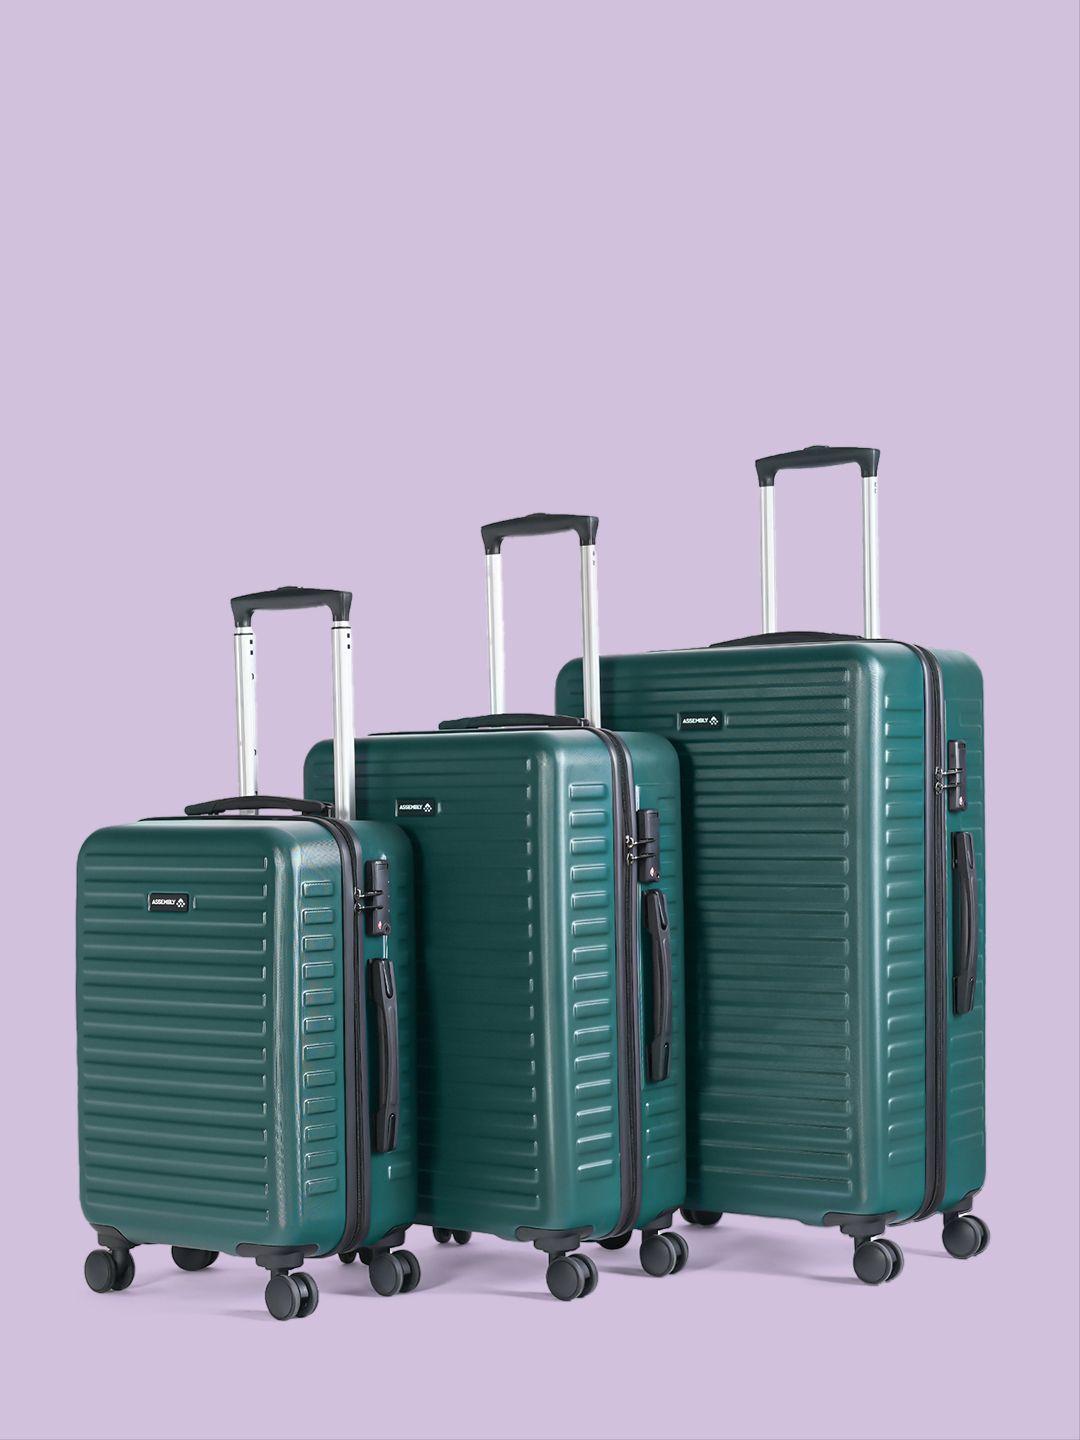 assembly set of 3 textured 360 degree rotation hard-sided trolley bags 40l, 60l 85l